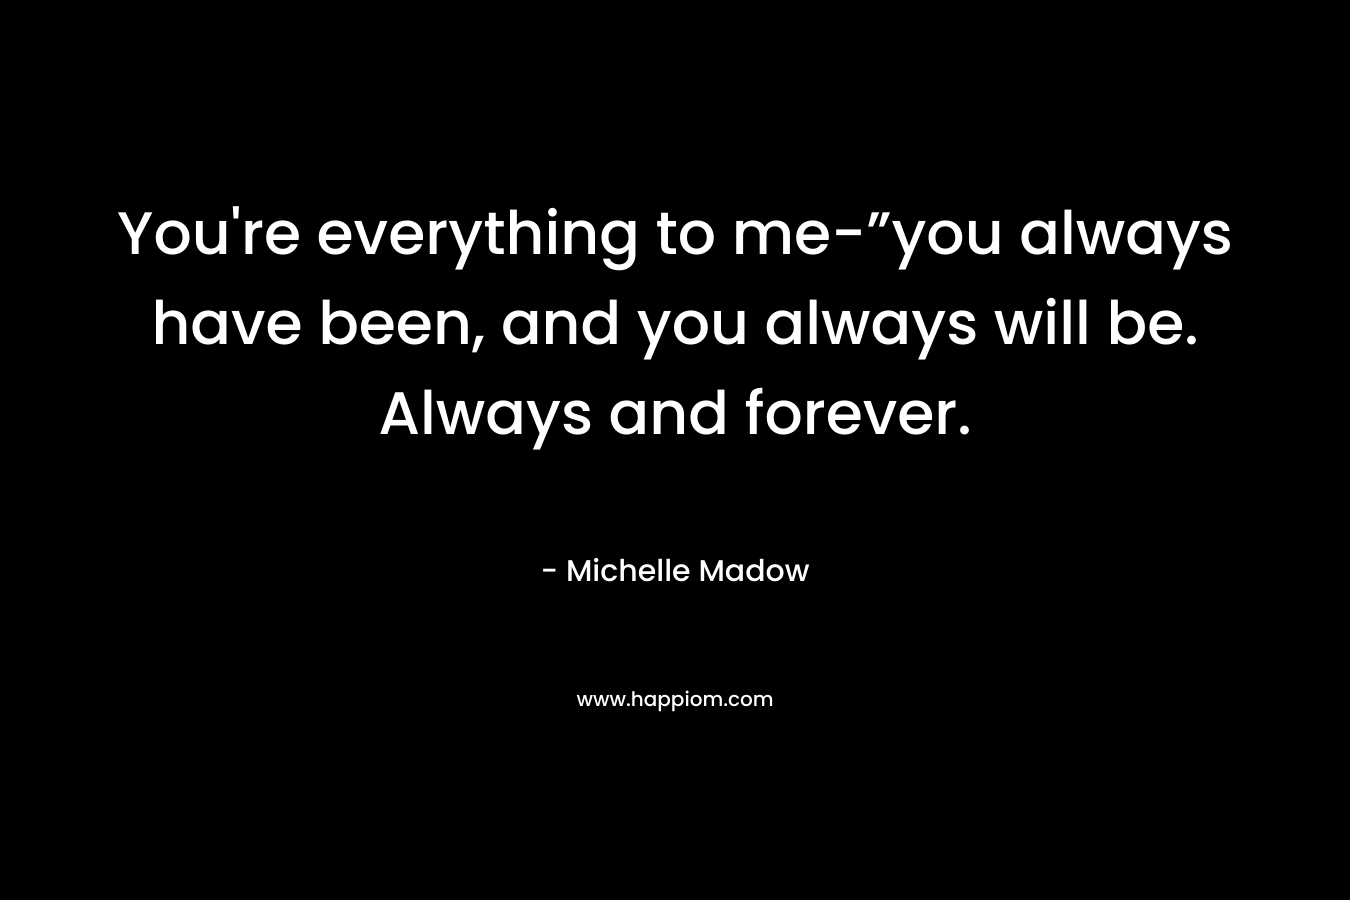 You're everything to me-”you always have been, and you always will be. Always and forever.